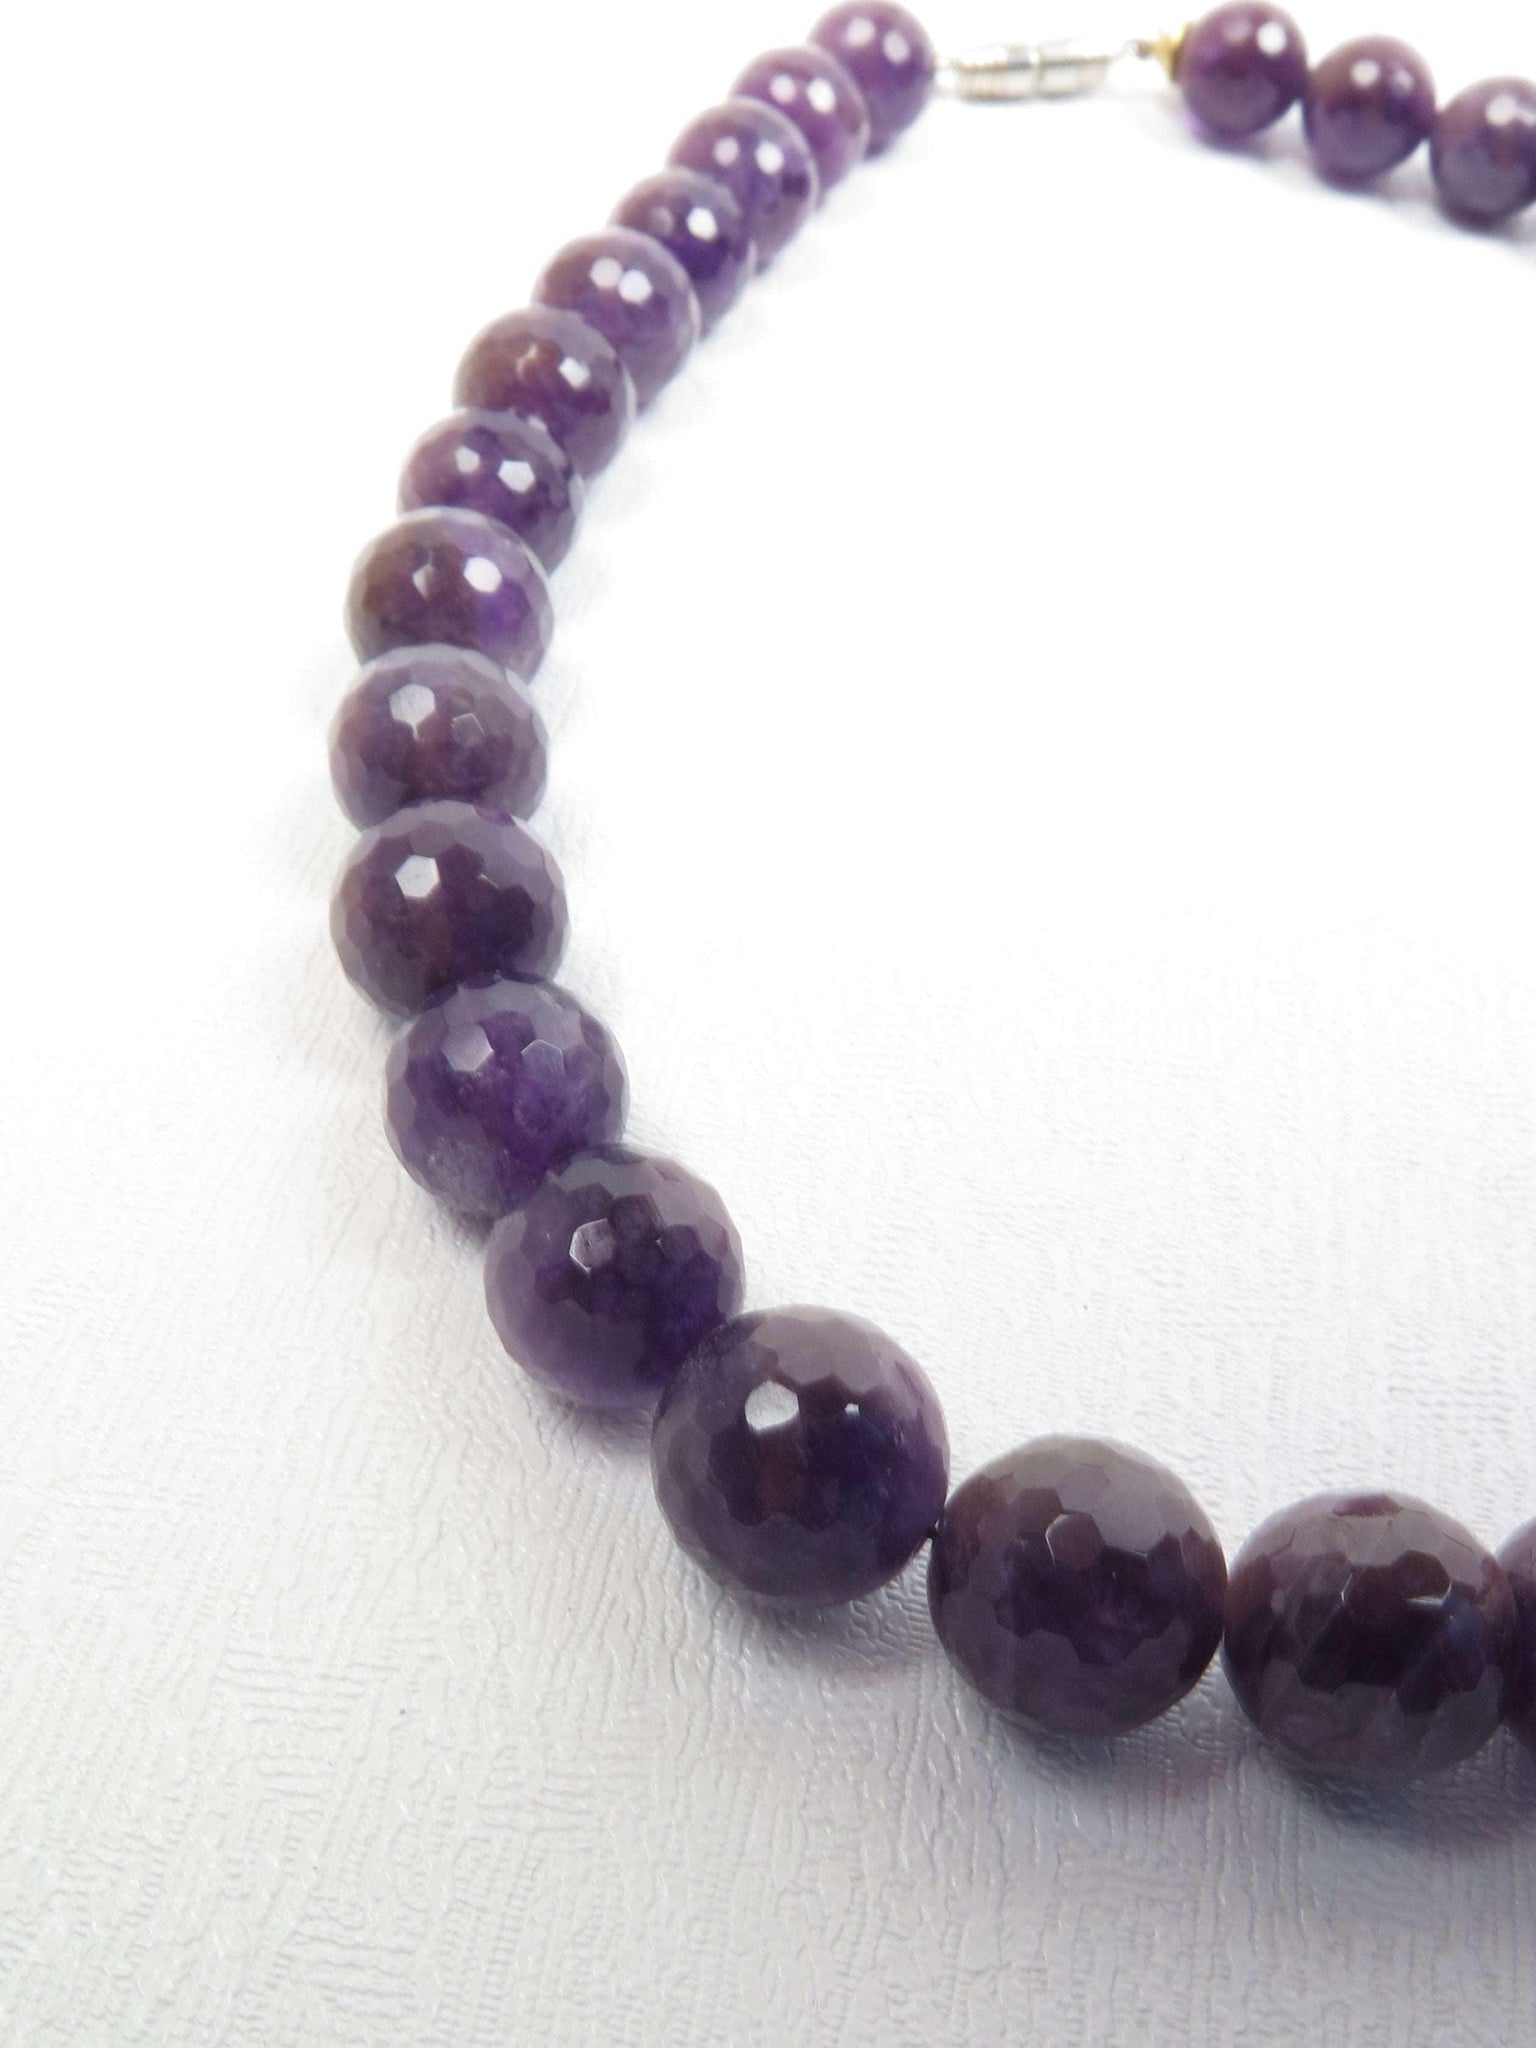 Amethyst Faceted Necklace - The Harlequin